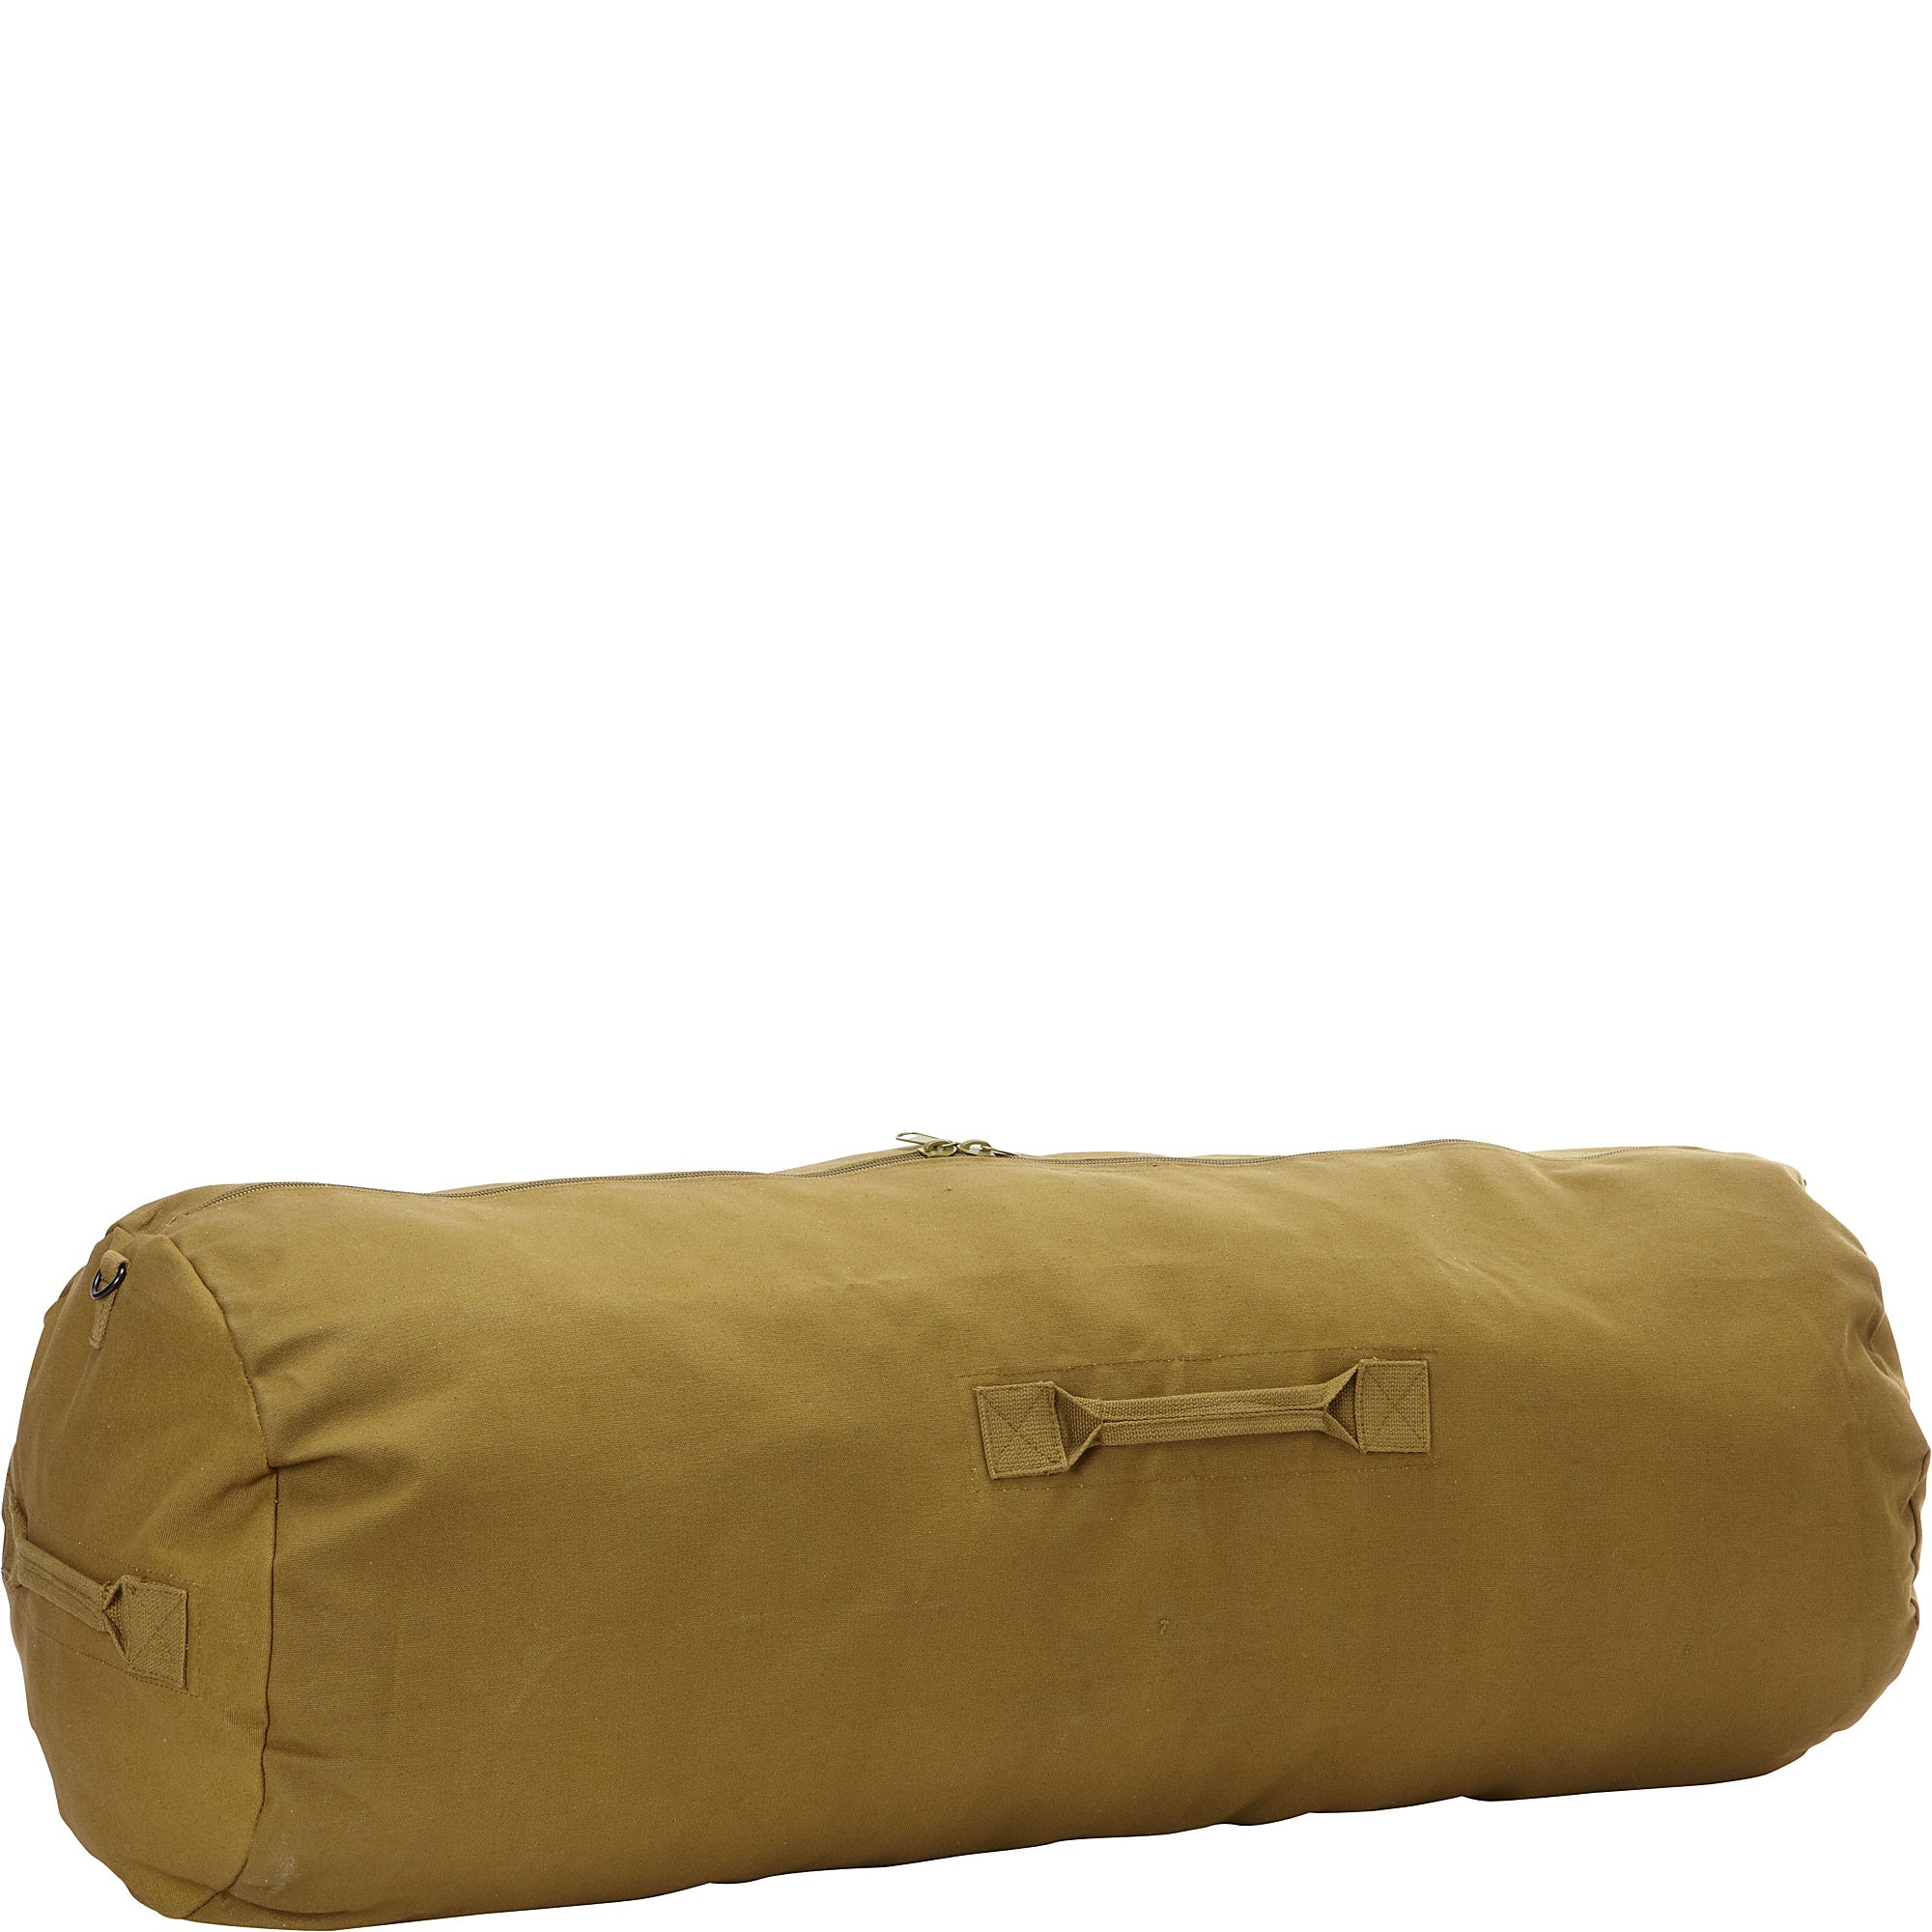 Coyote Brown - Cotton Canvas Military Duffle Bag with Side Zipper 25 in. x 42 in.